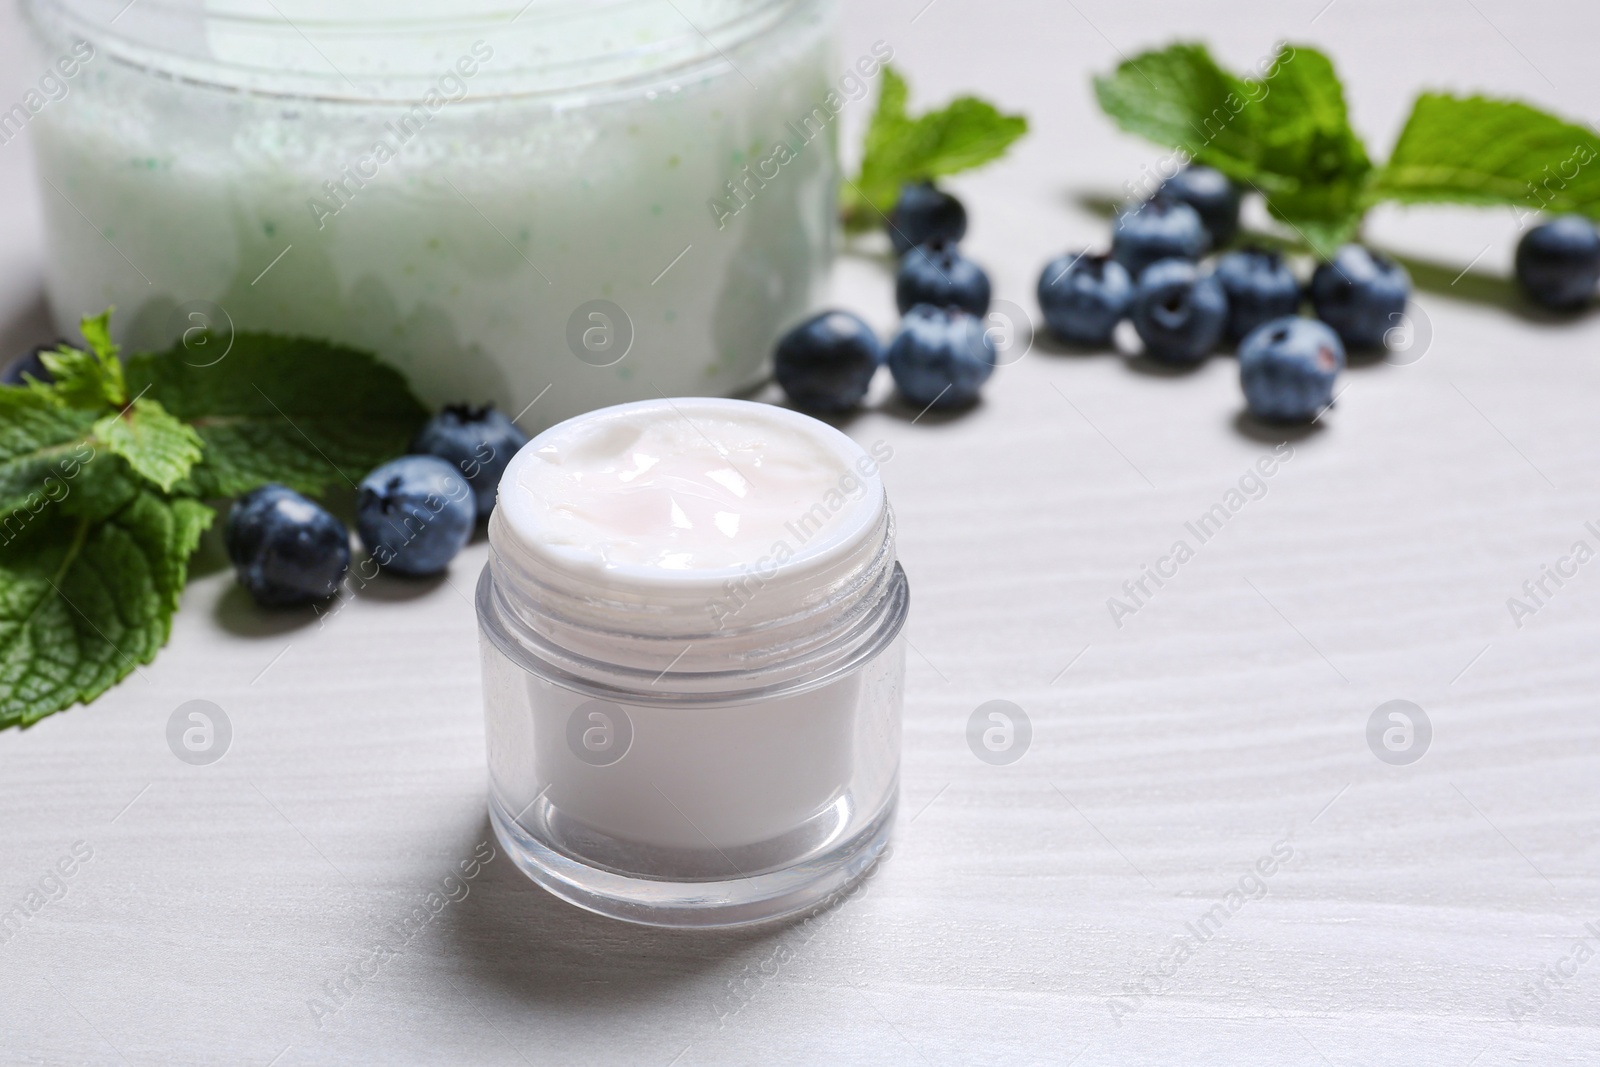 Photo of Jar of body cream and blueberry on light wooden background